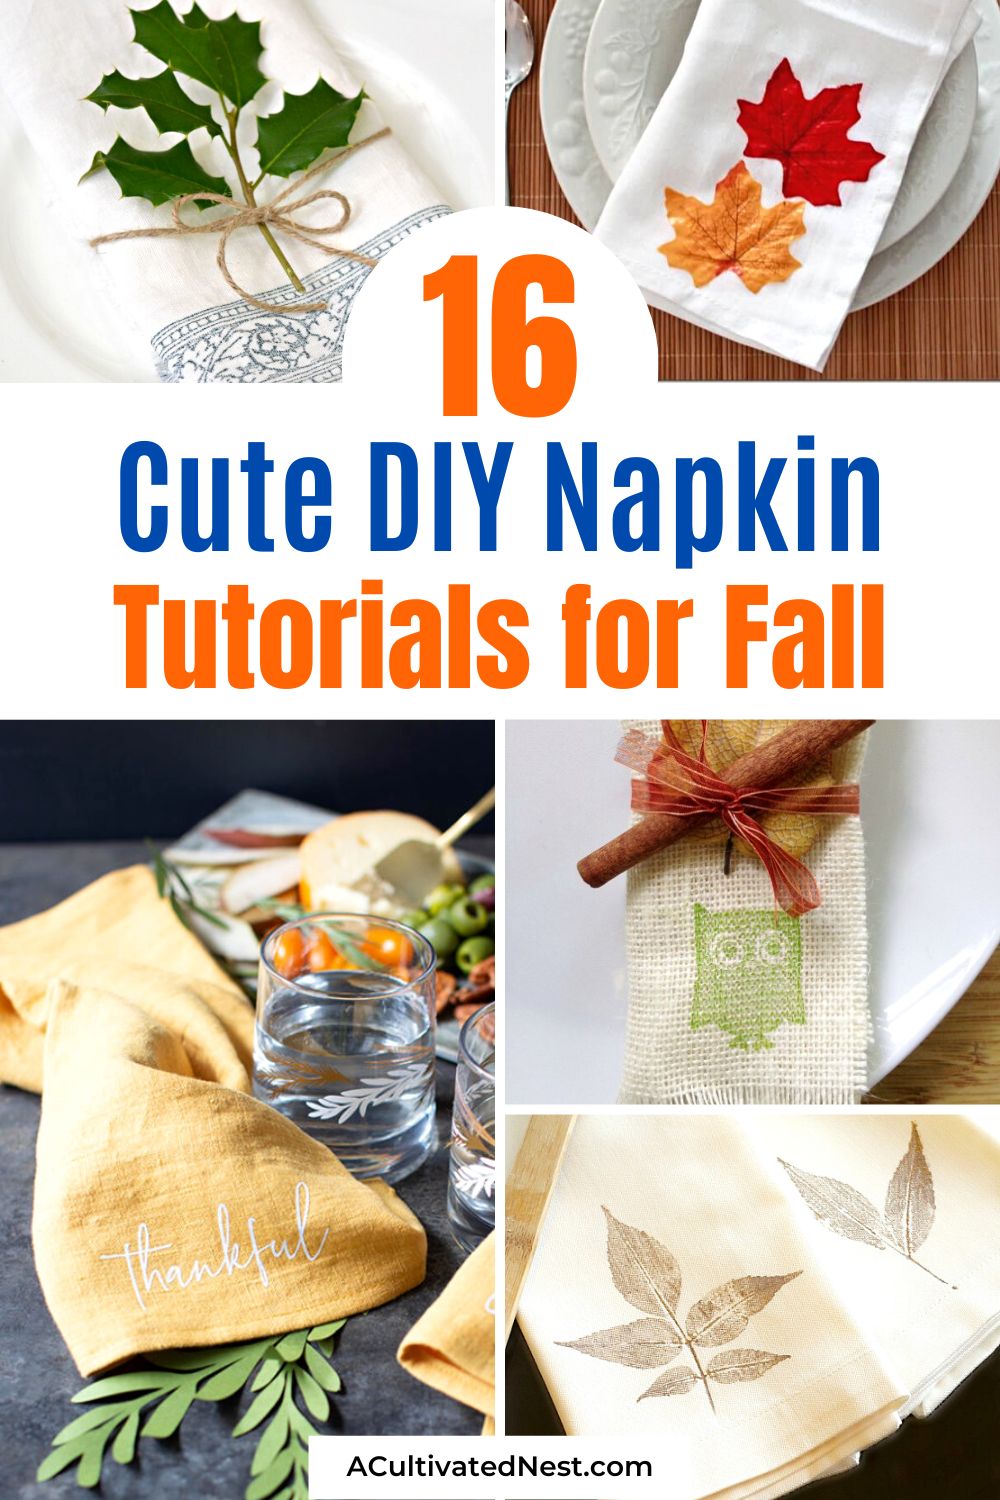 16 Cute DIY Napkins for Fall- Get crafty this fall with these charming DIY napkins! Elevate your table settings with personalized touches and warm, earthy fabrics. Your guests will love the cozy, handmade feel. | #DIYHomeDecor #FallTableSetting #crafts #sewing #ACultivatedNest